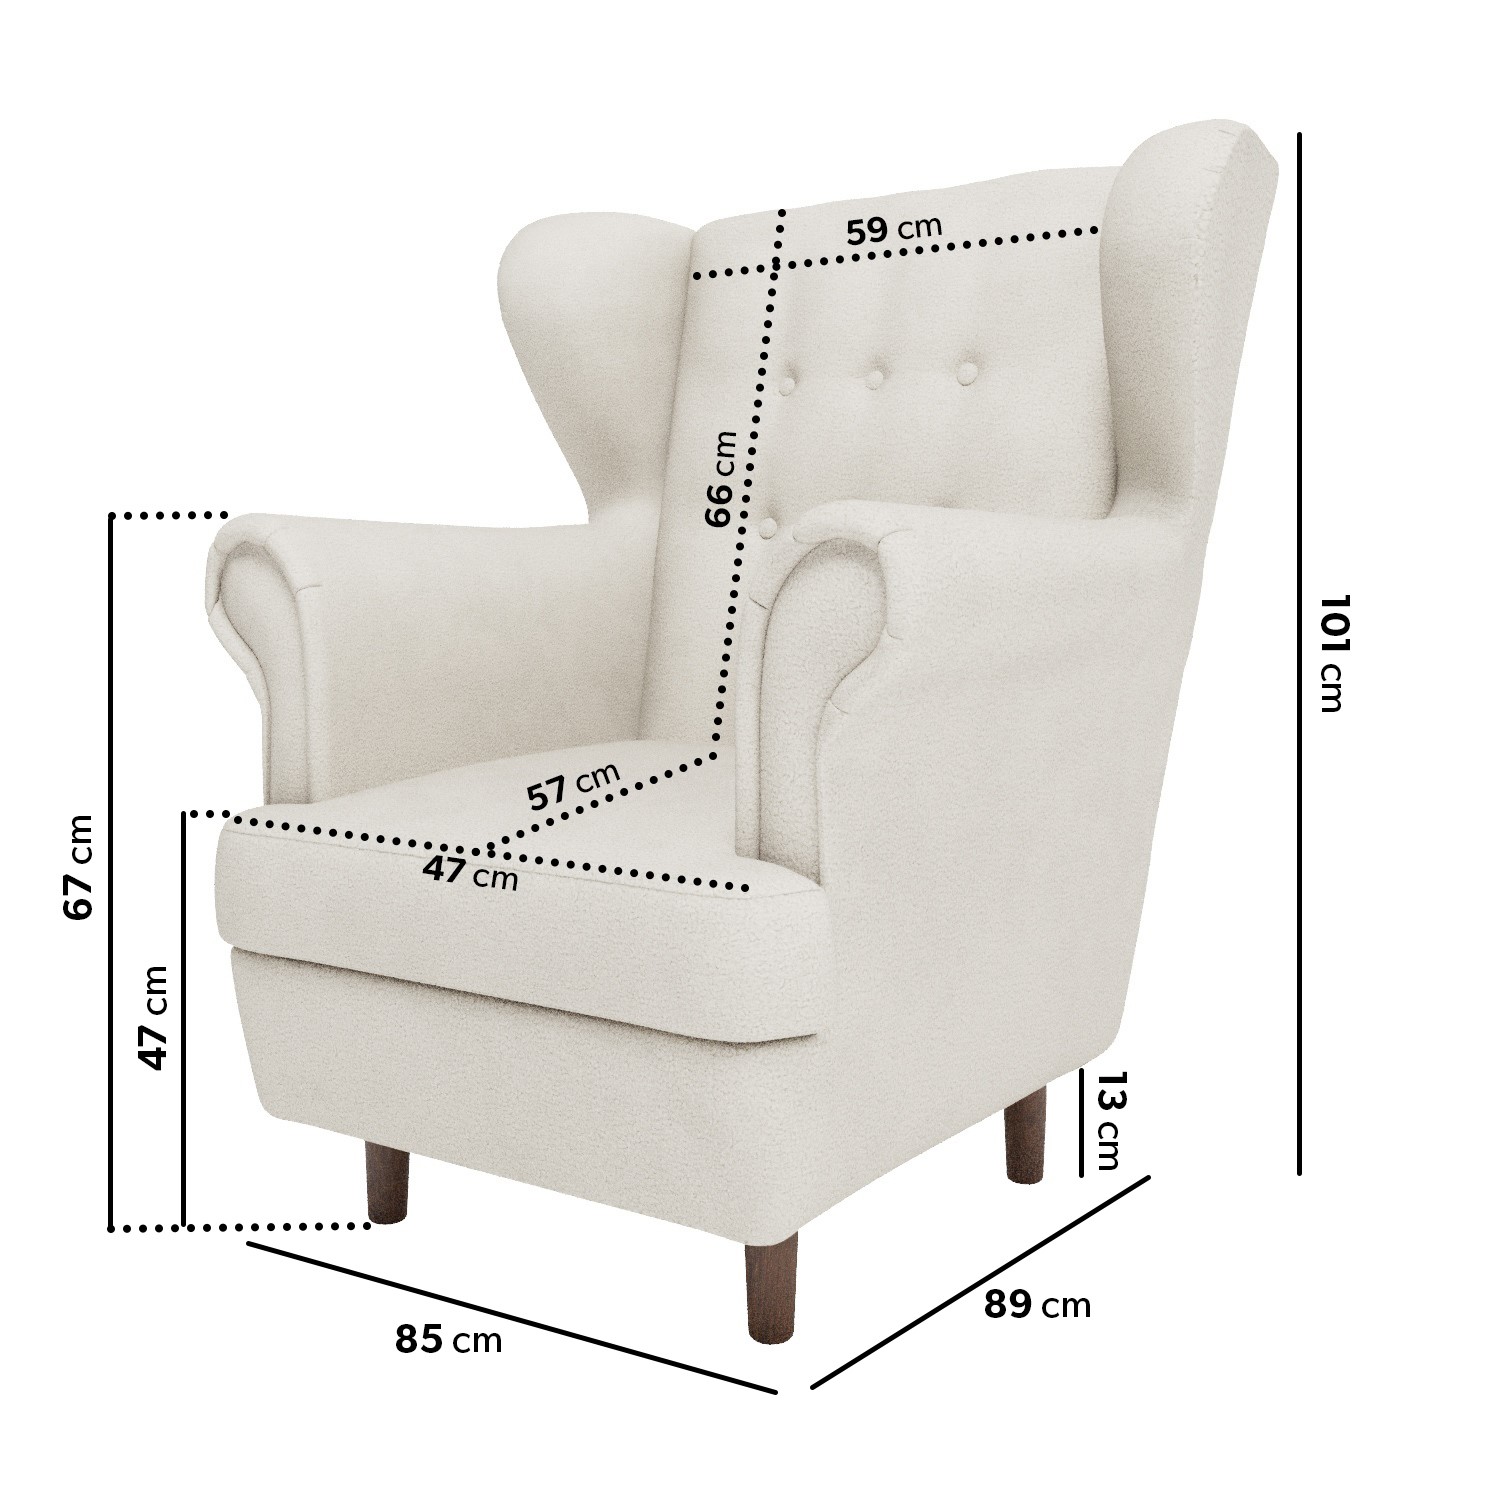 Read more about Cream boucle wingback armchair martha